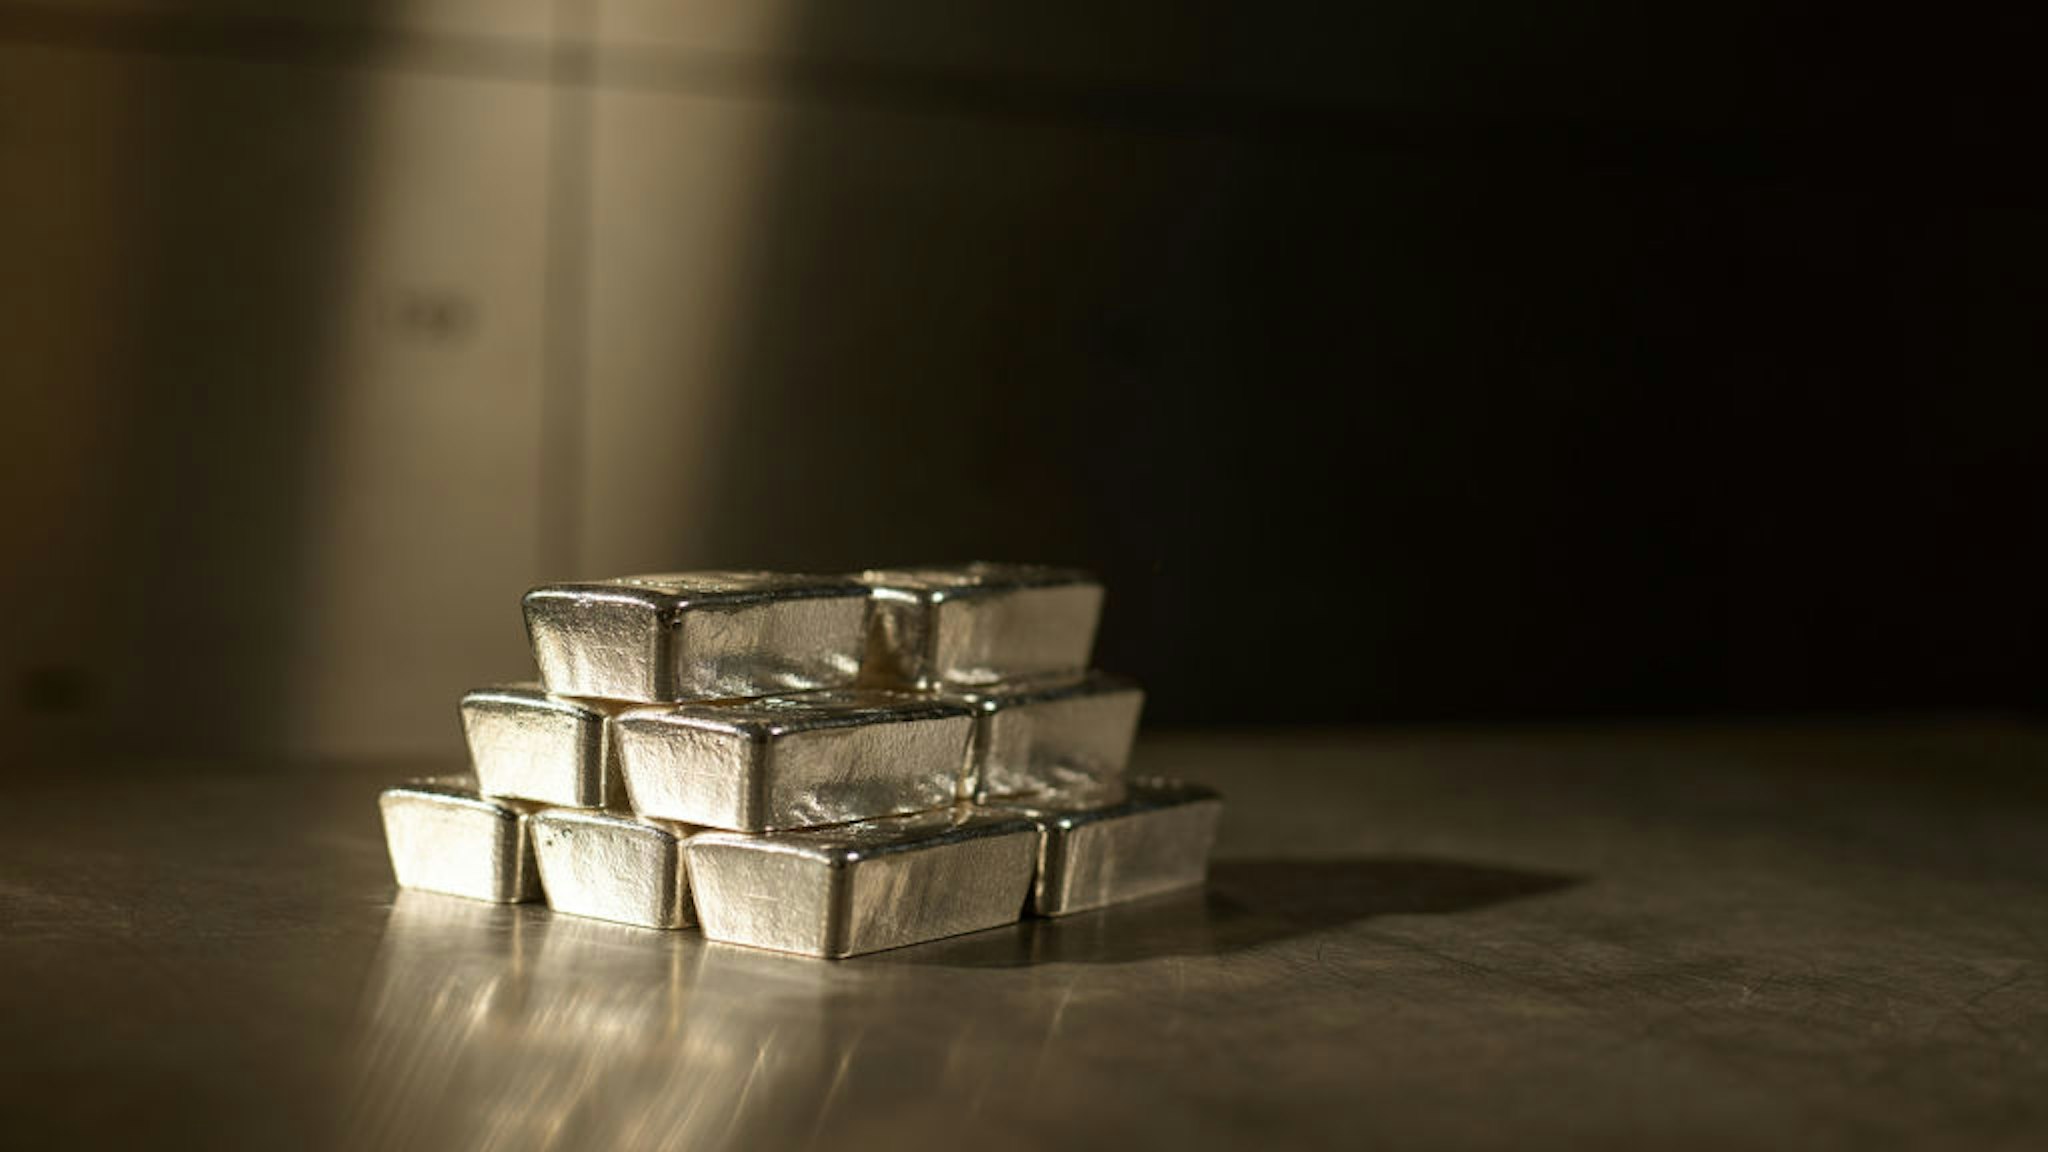 stack of 500 gram silver bars sit in the precious metals vault at Pro Aurum KG in Munich, Germany, on Tuesday, Jan. 30, 2018. Gold, trading near an 18-month high, will average $1,318 an ounce this year, a little below the current price, according to an annual London Bullion Market Association poll. Photographer: Dominik Osswald/Bloomberg via Getty Images